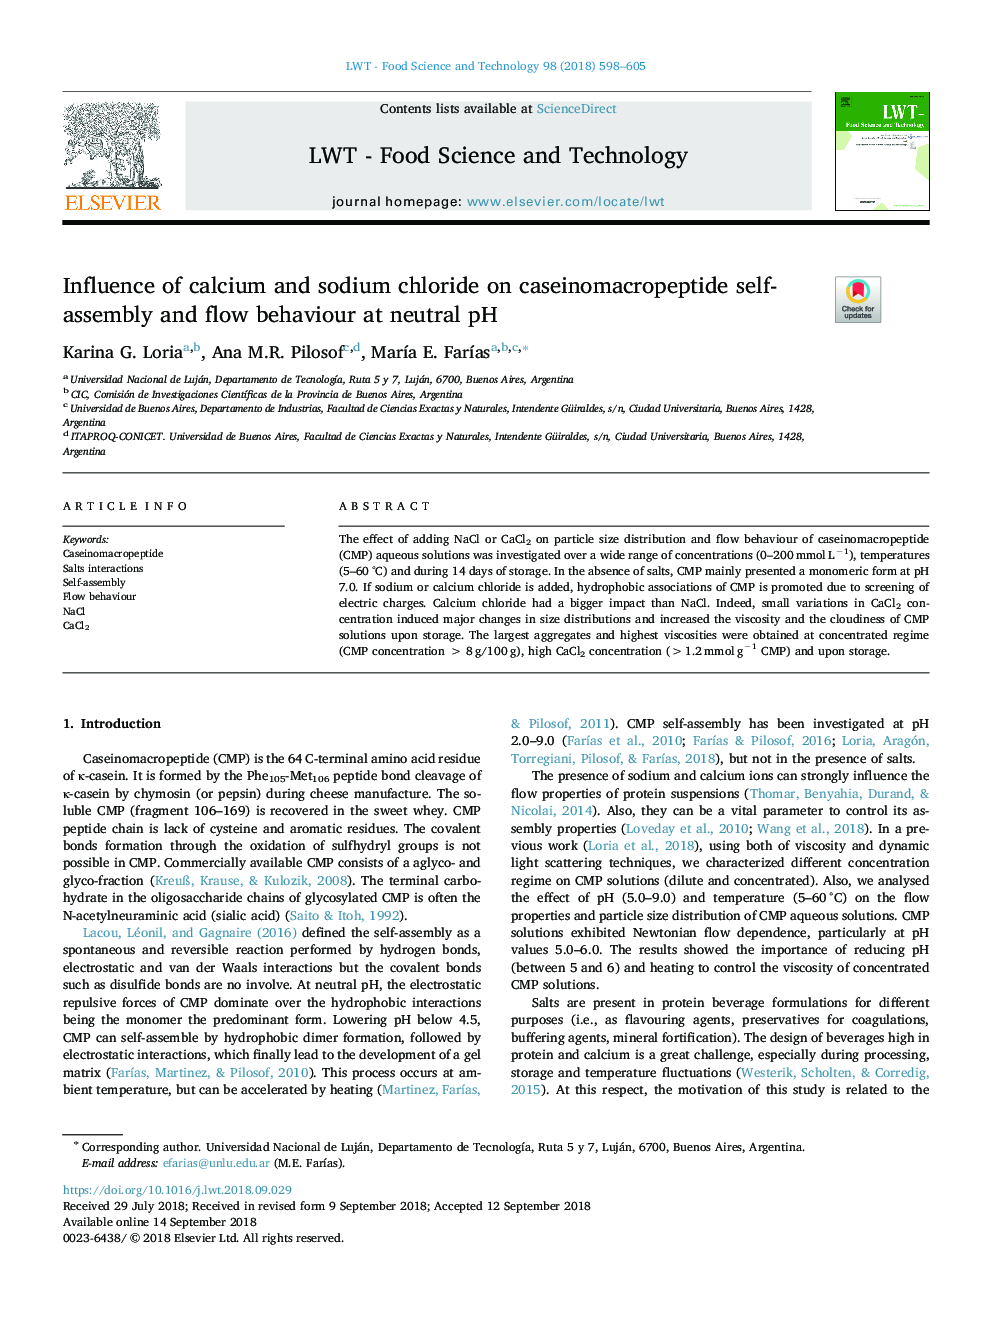 Influence of calcium and sodium chloride on caseinomacropeptide self-assembly and flow behaviour at neutral pH